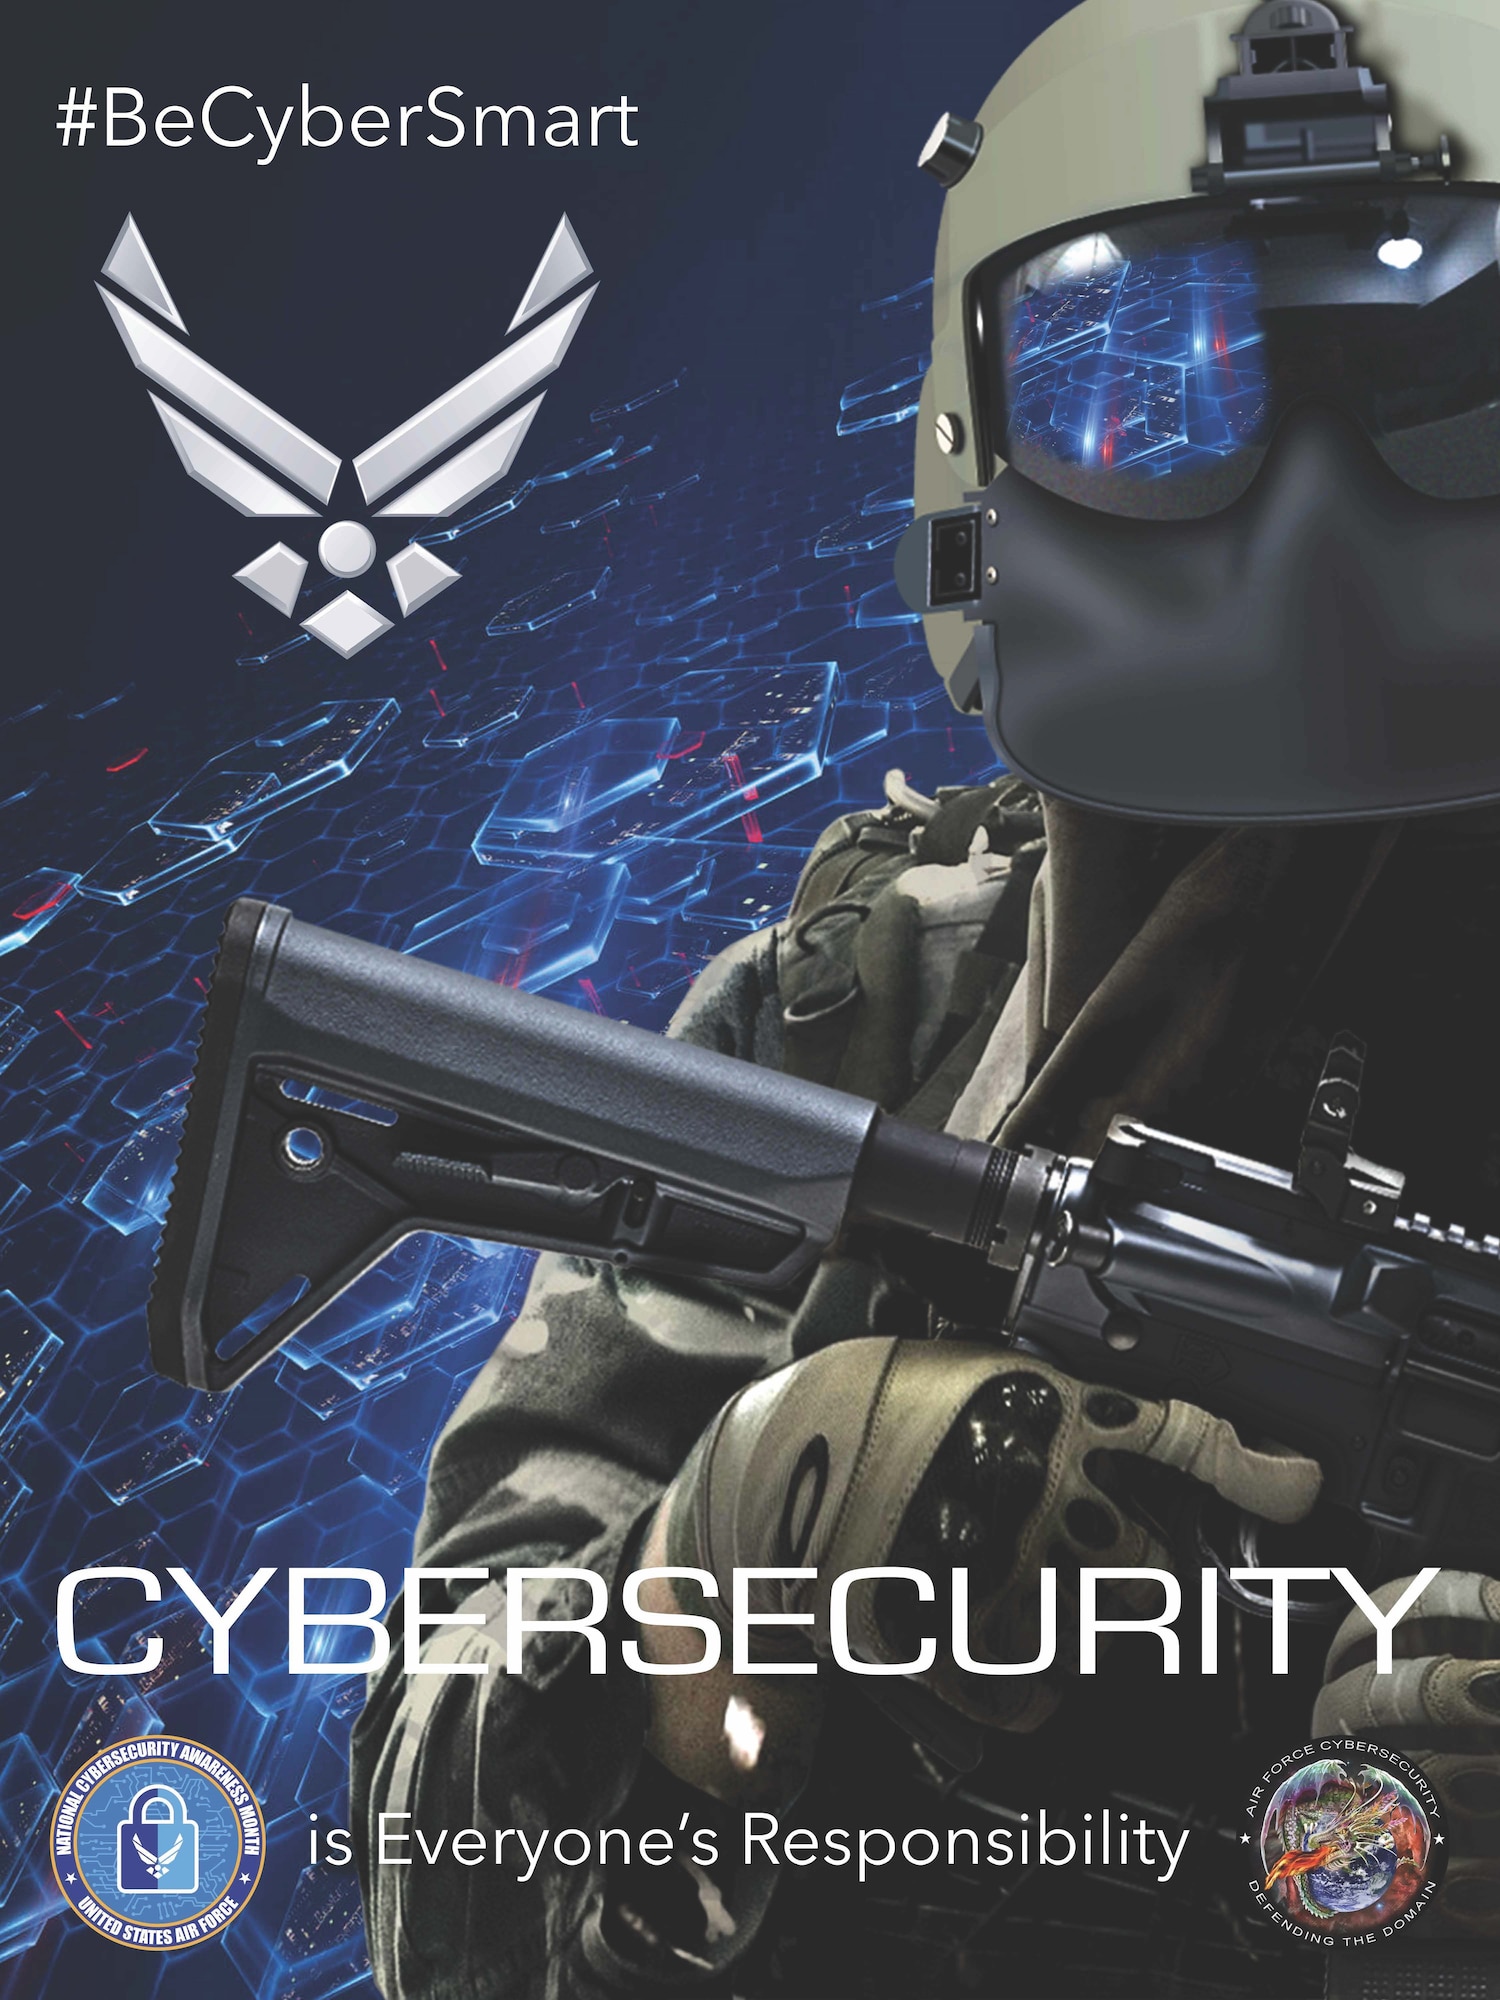 Air Force observes National Cybersecurity Awareness Month in October.